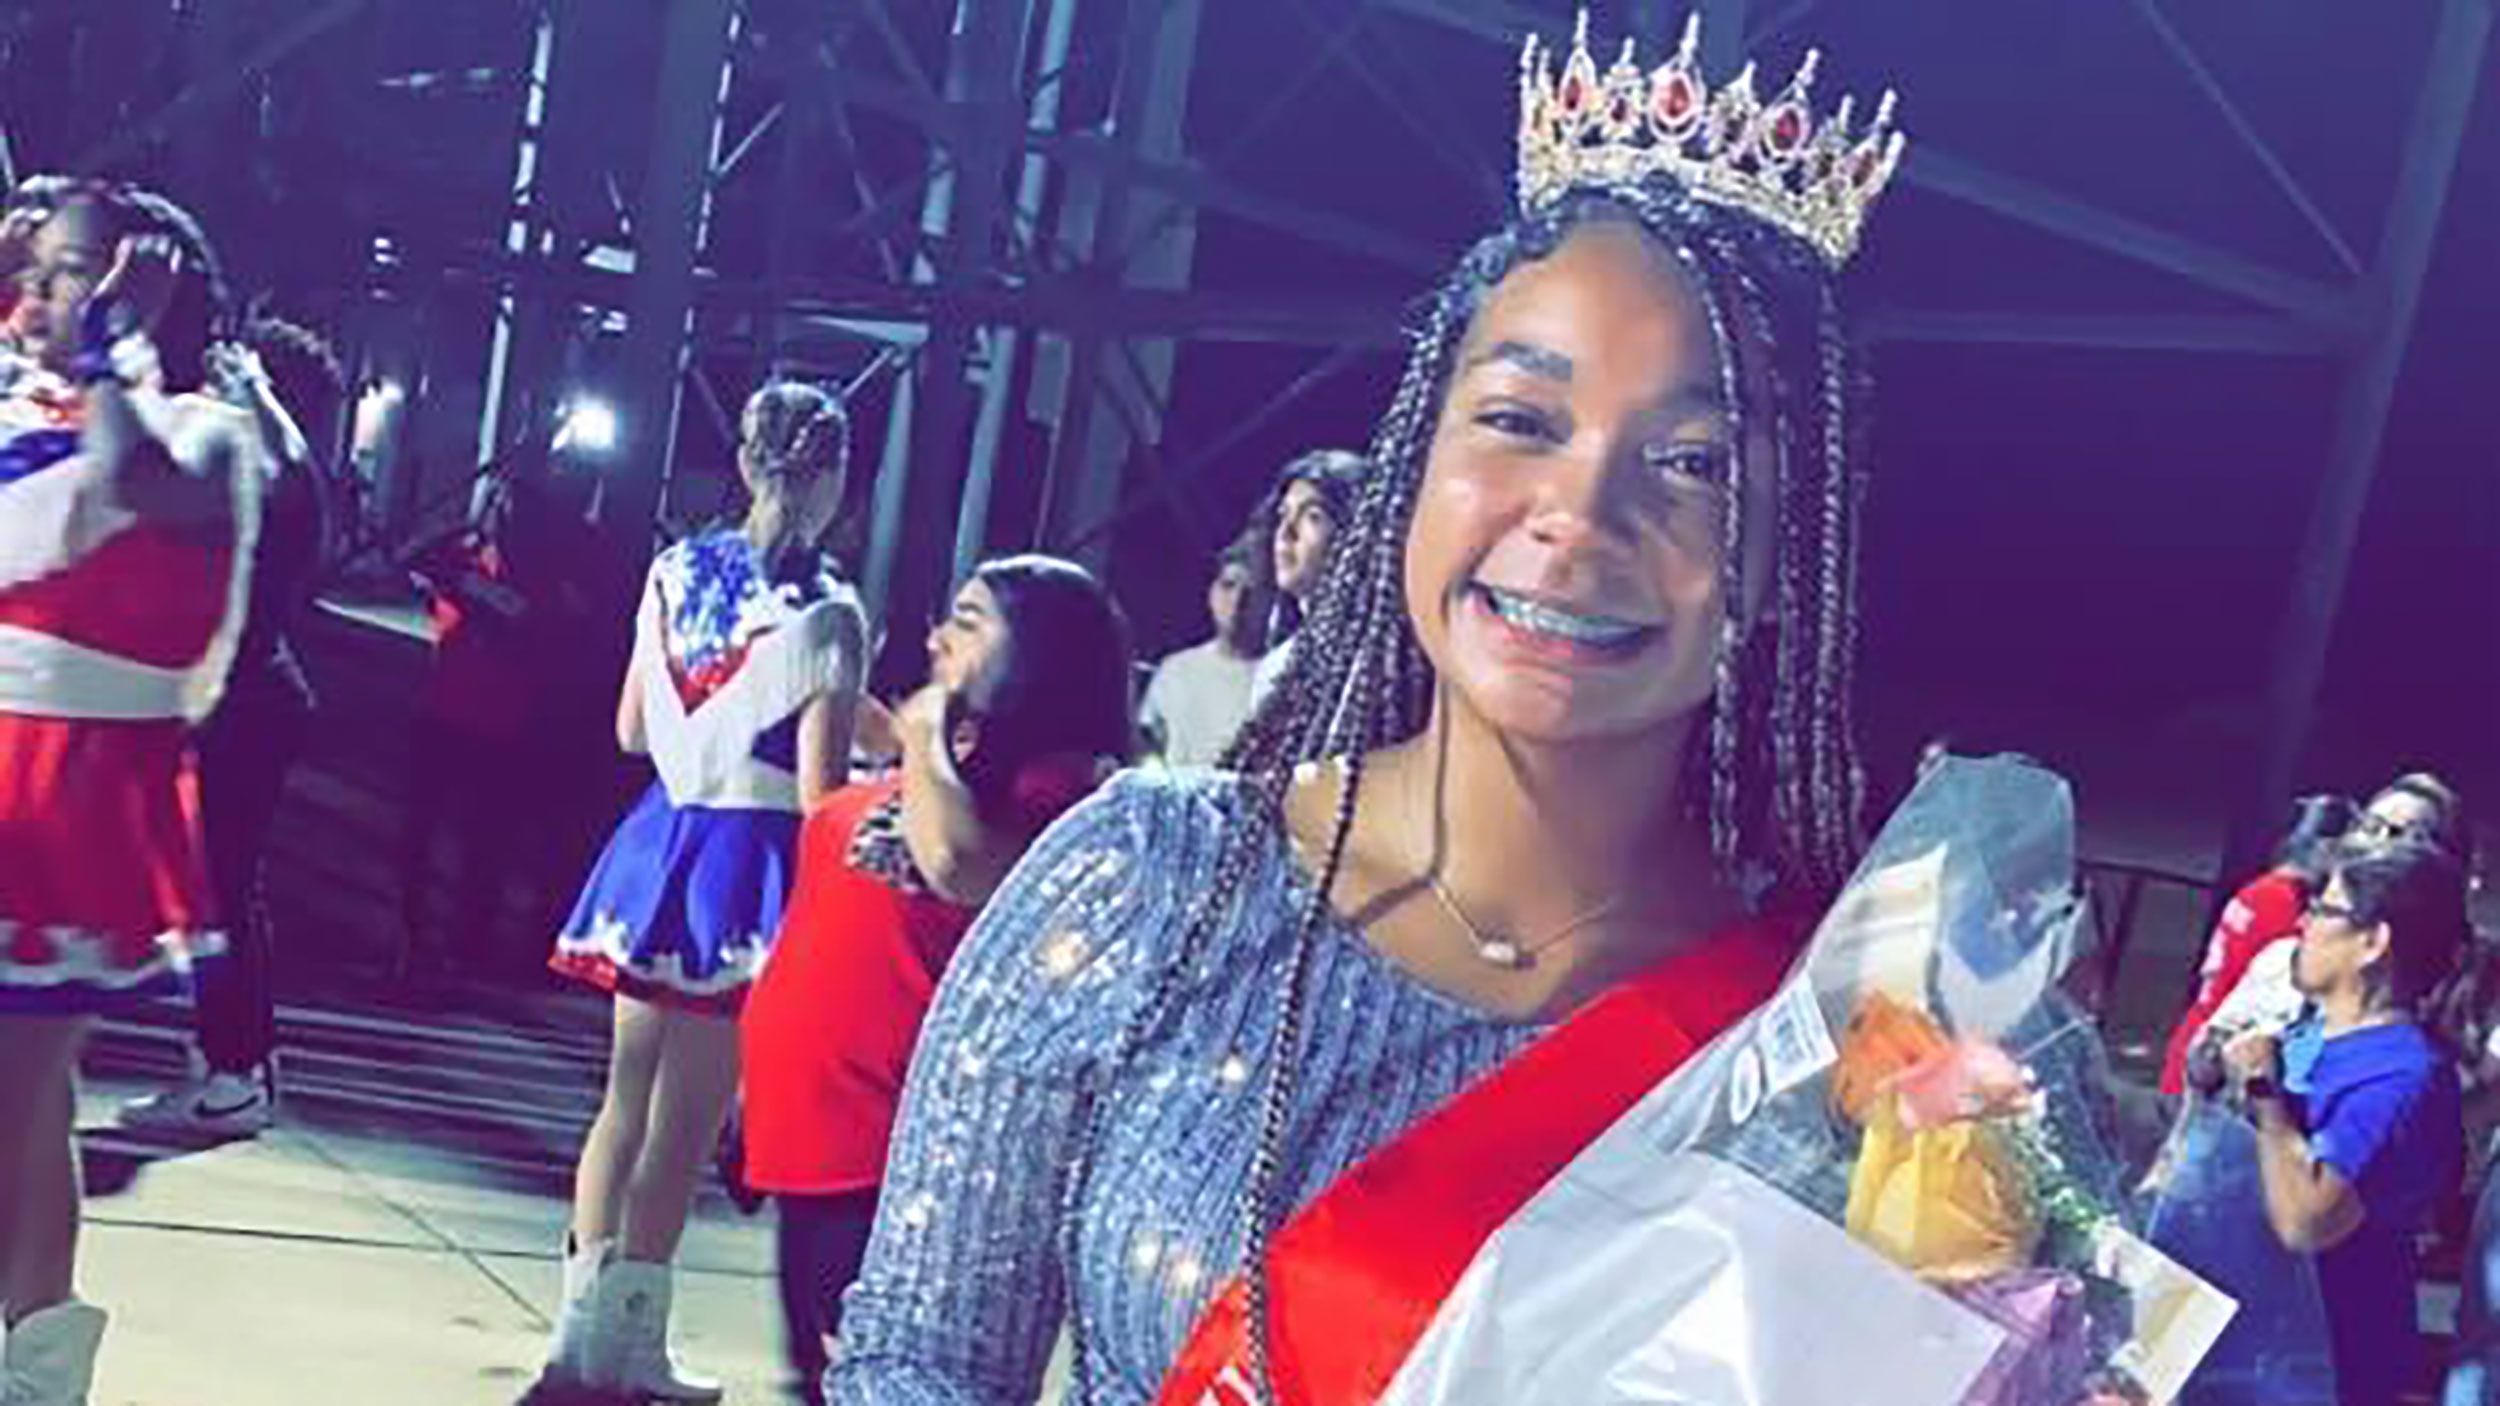 No more homecoming queen? Schools advised to consider